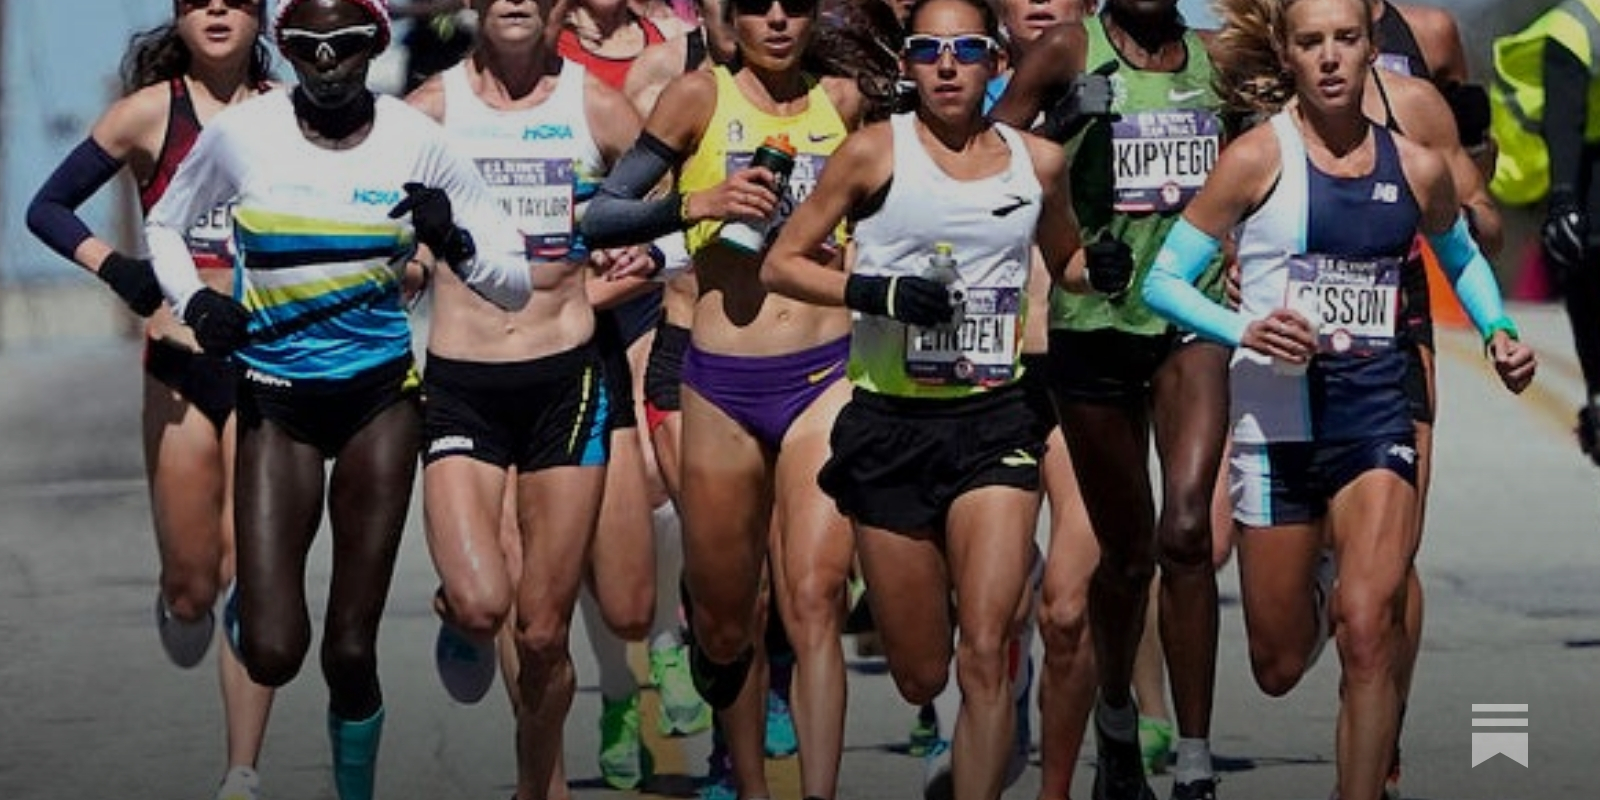 The Runners Changing Course on Uniform Expectations - The New York